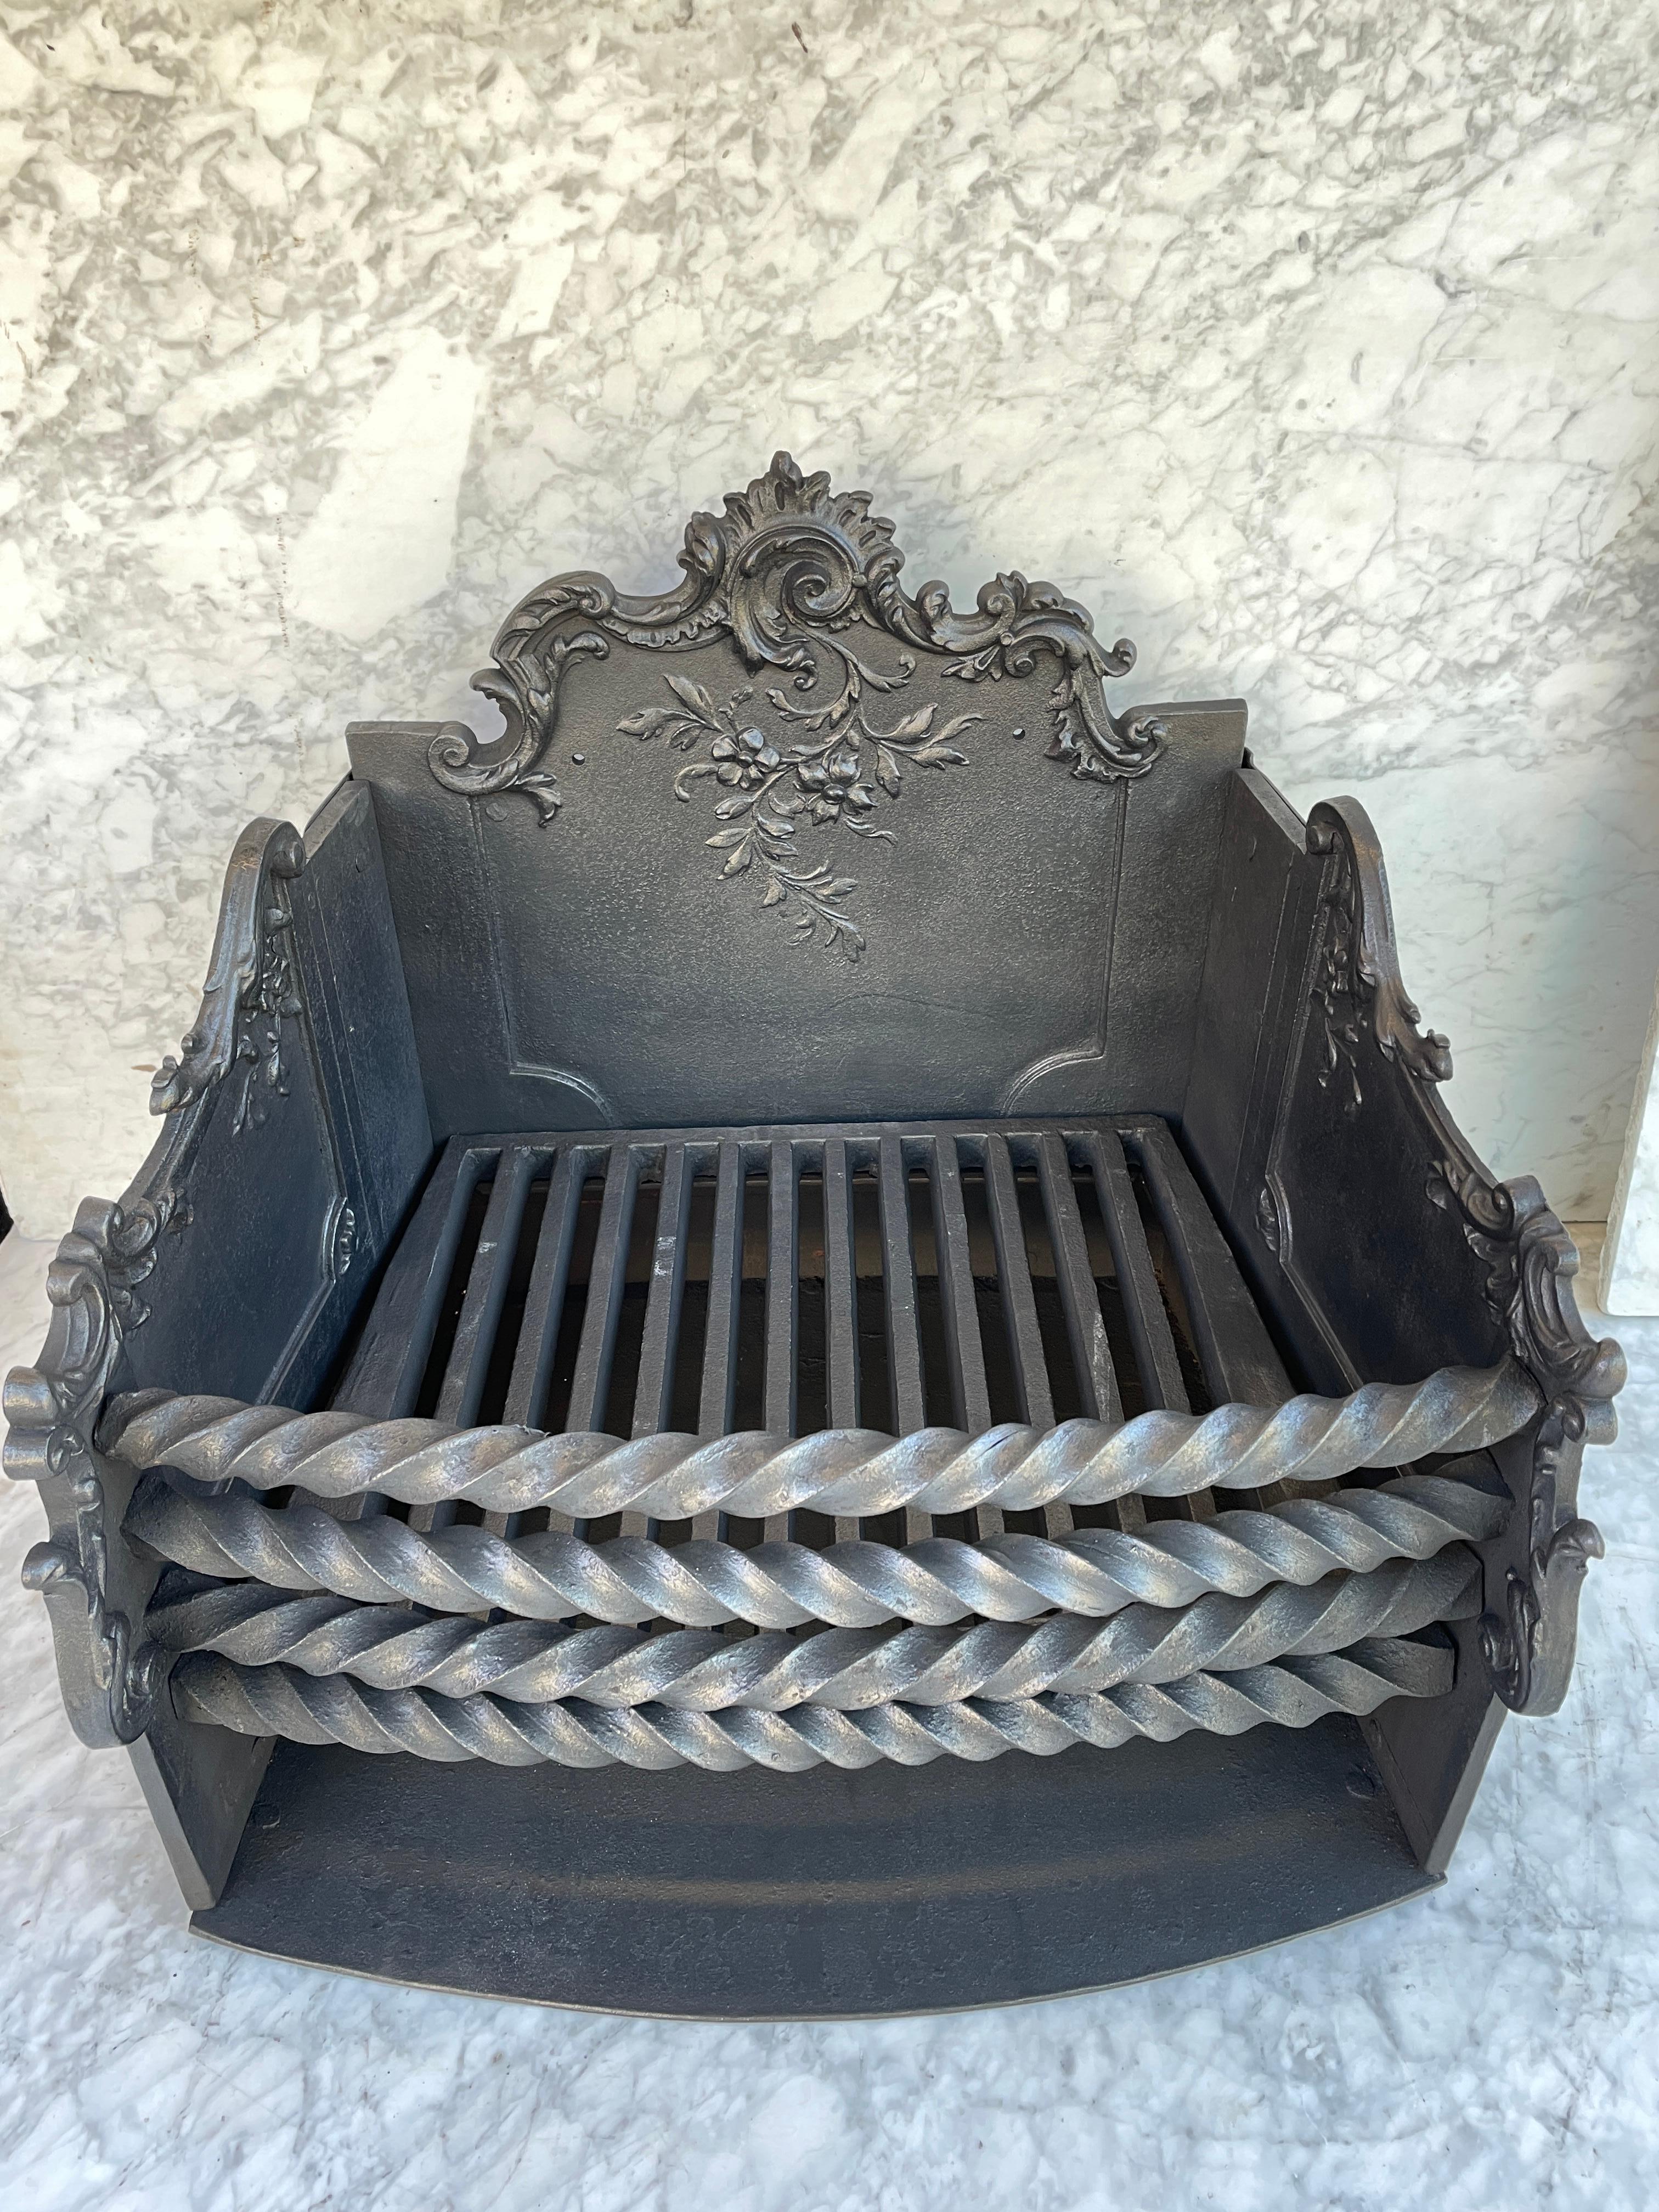 Antique cast ant wrought iron fireplace grate or basket.
This very robust and clean fire basket is a real gem. The craftmanship is visually from every corner. 
  